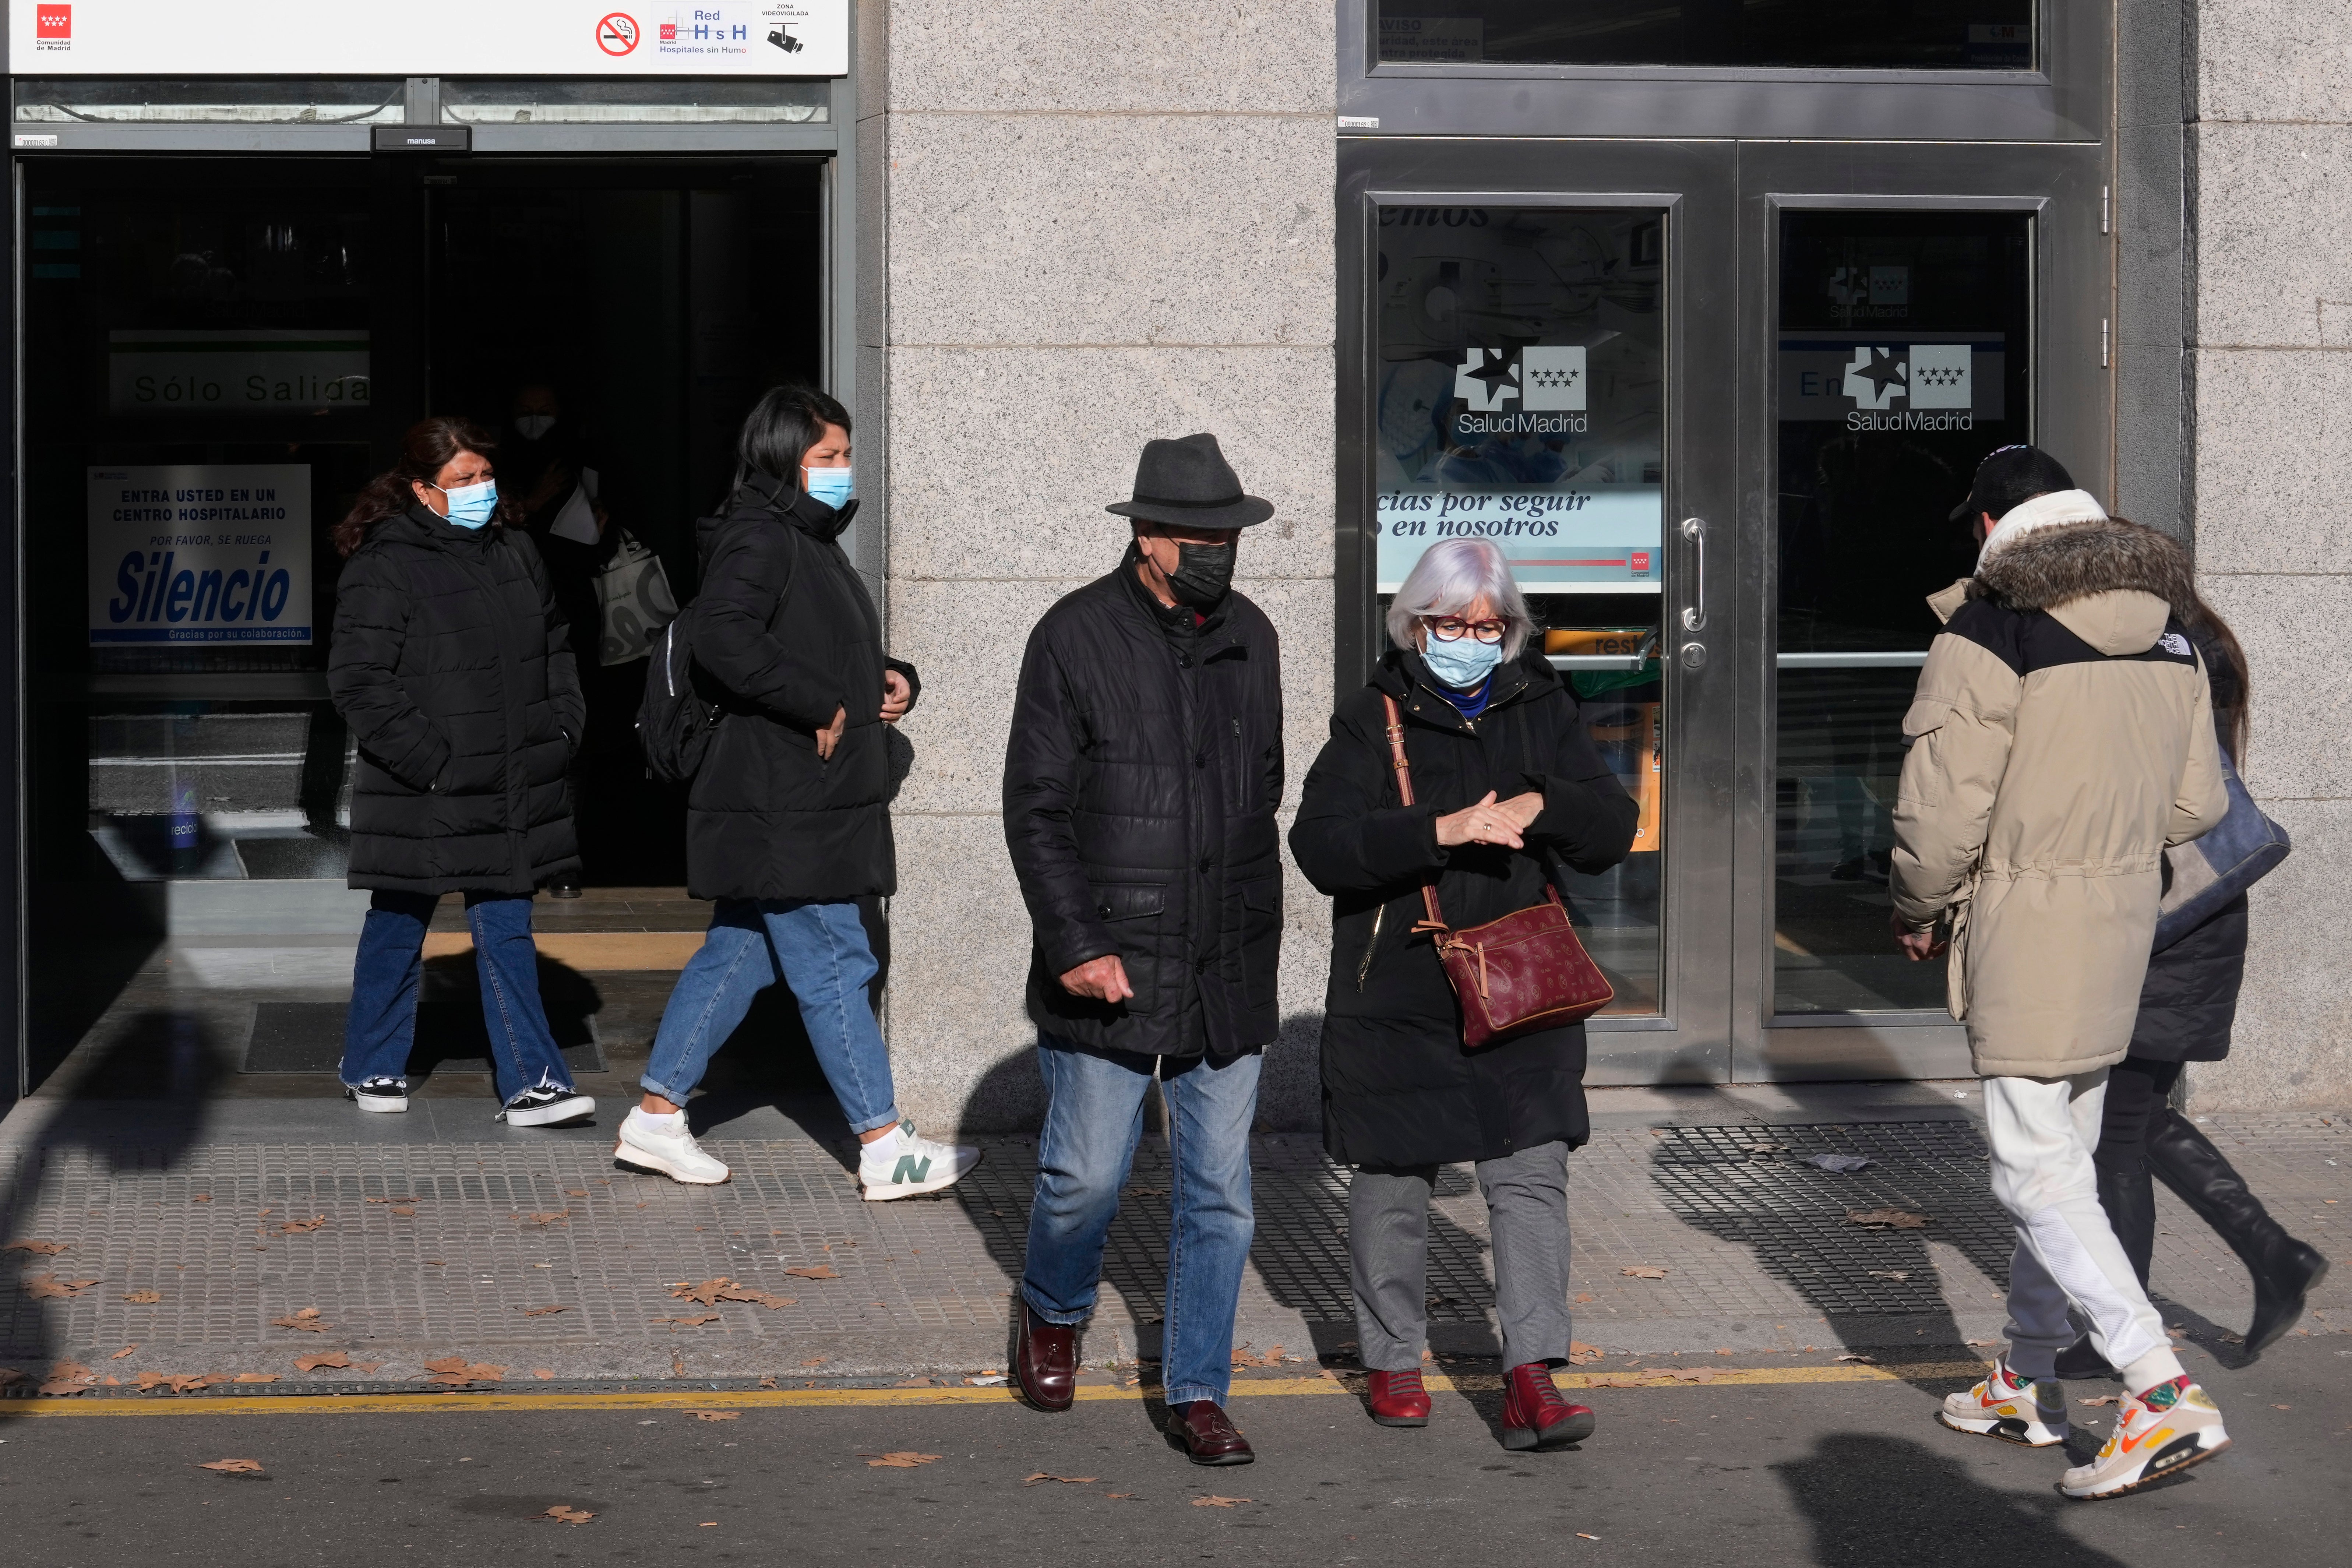 The reintroduction of face masks in Spain comes amid a surge in respiratory illnesses